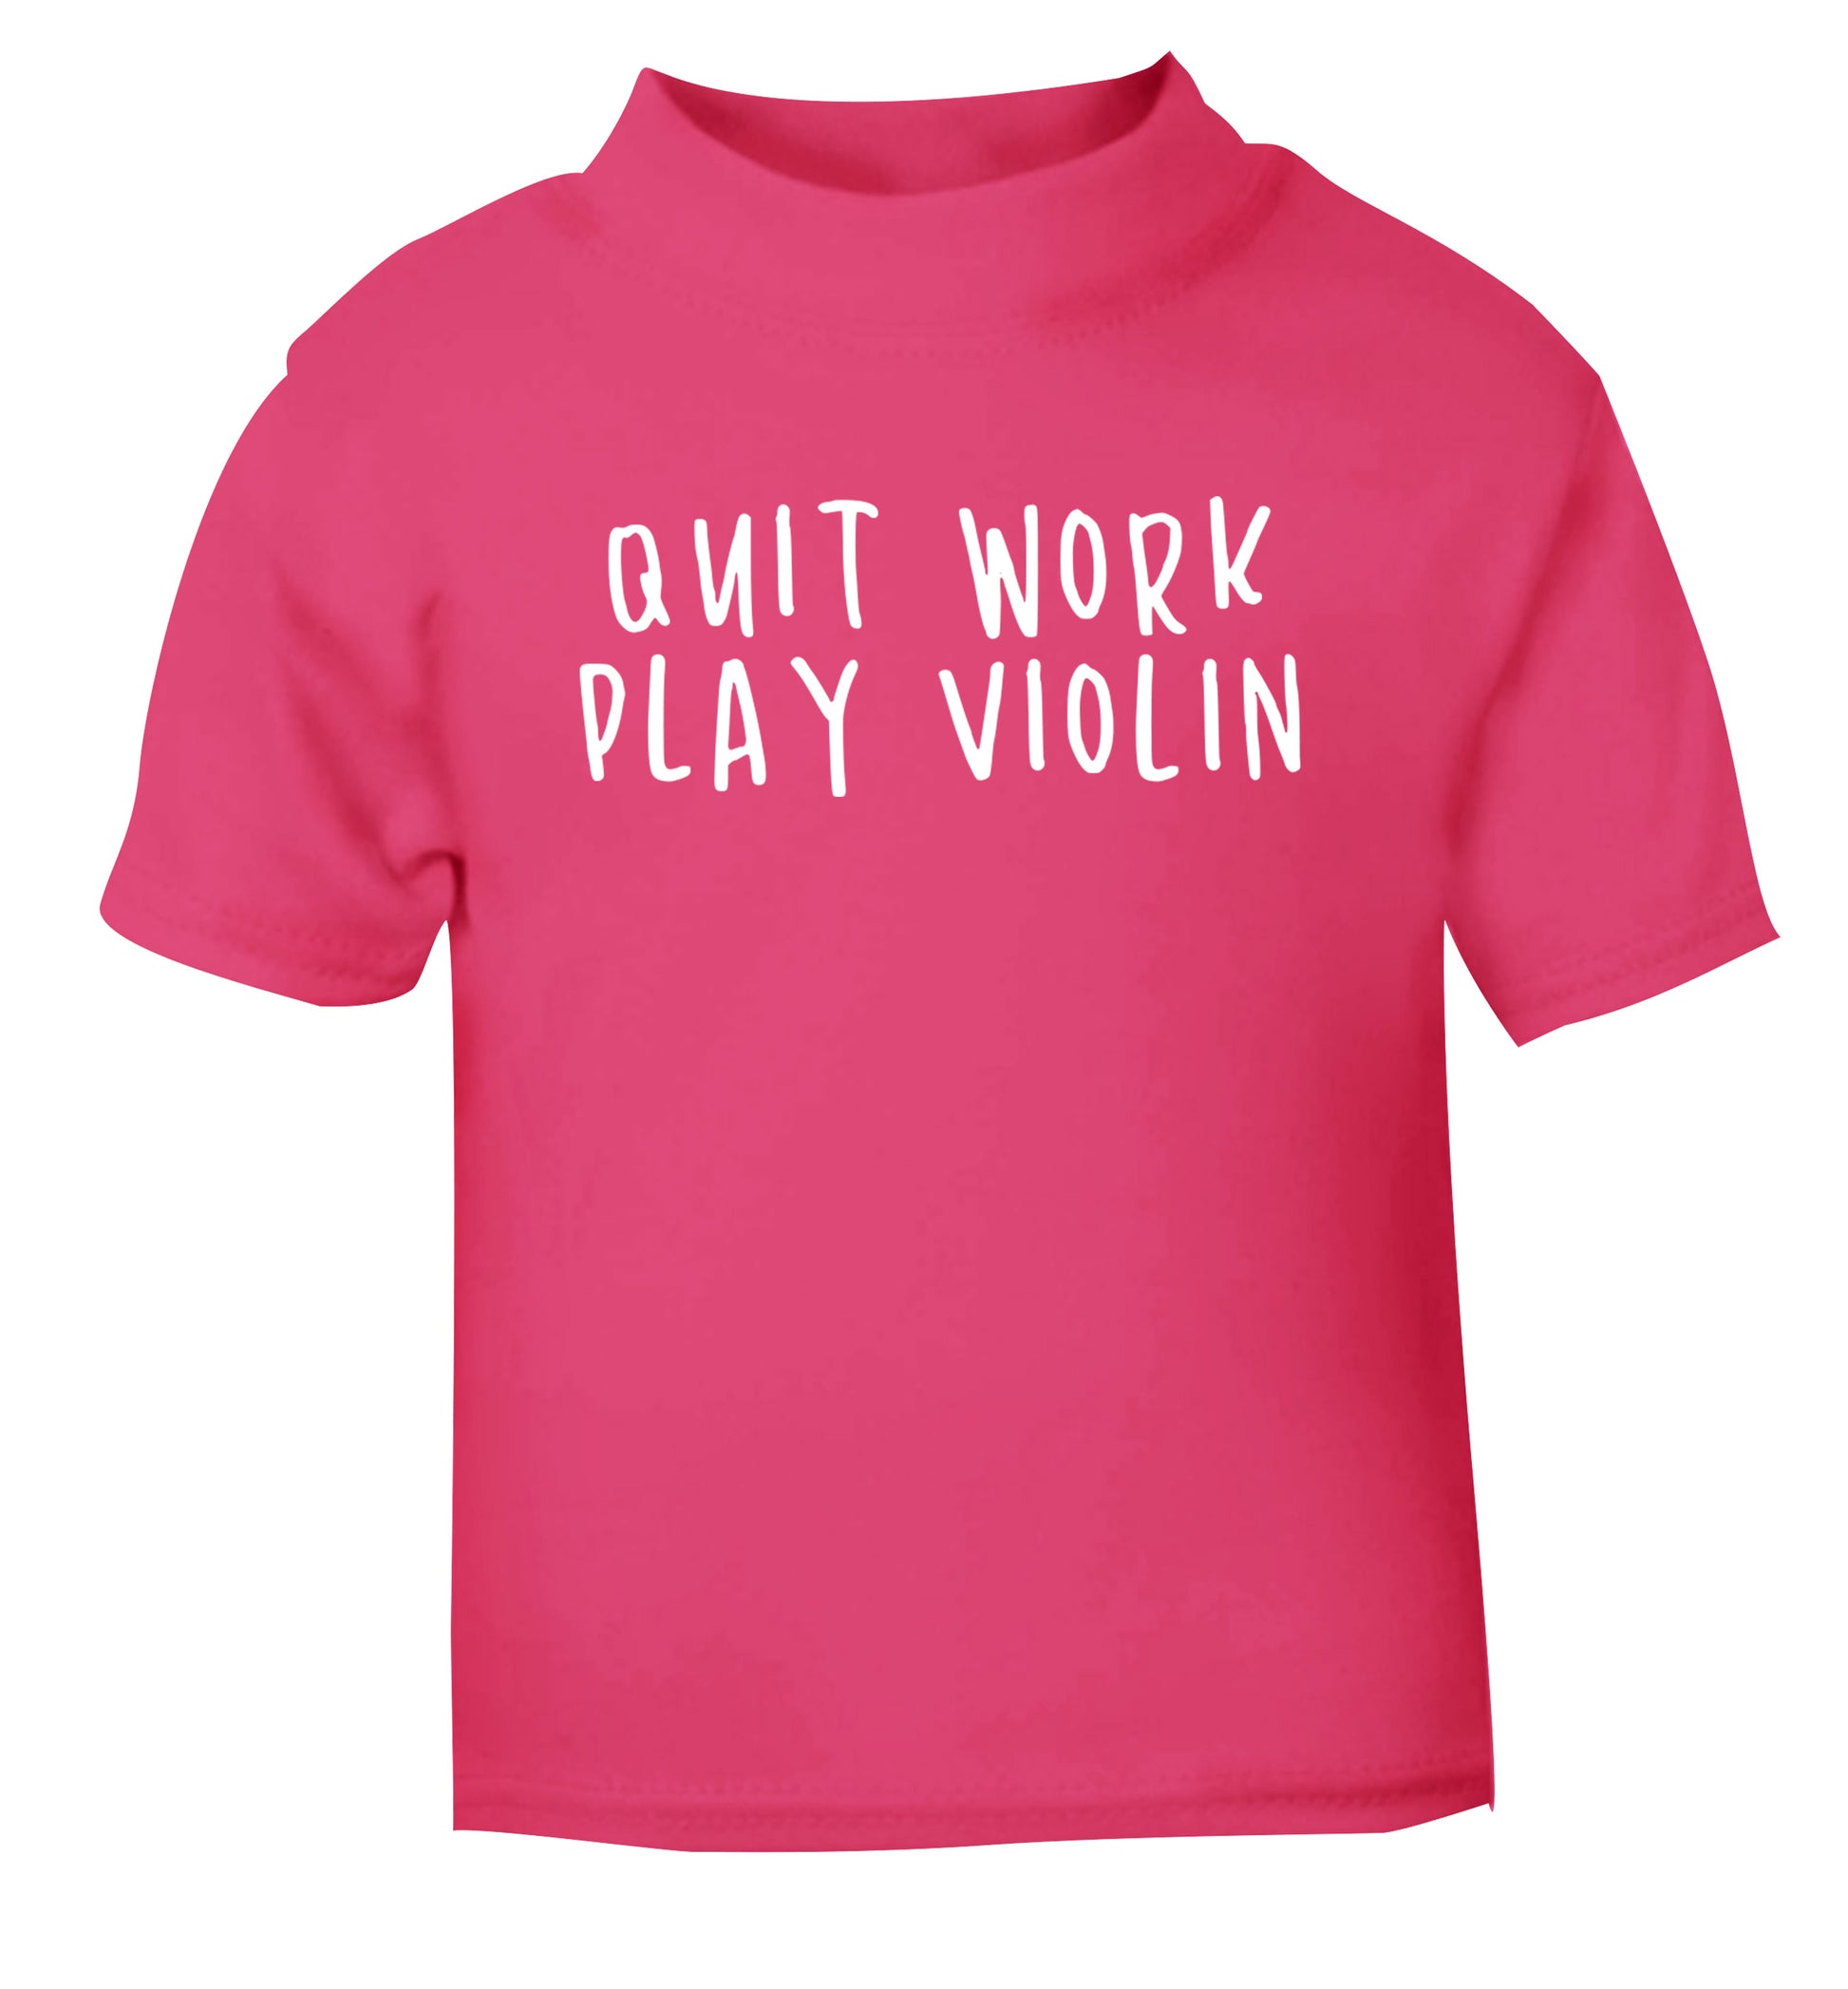 Quit work play violin pink Baby Toddler Tshirt 2 Years